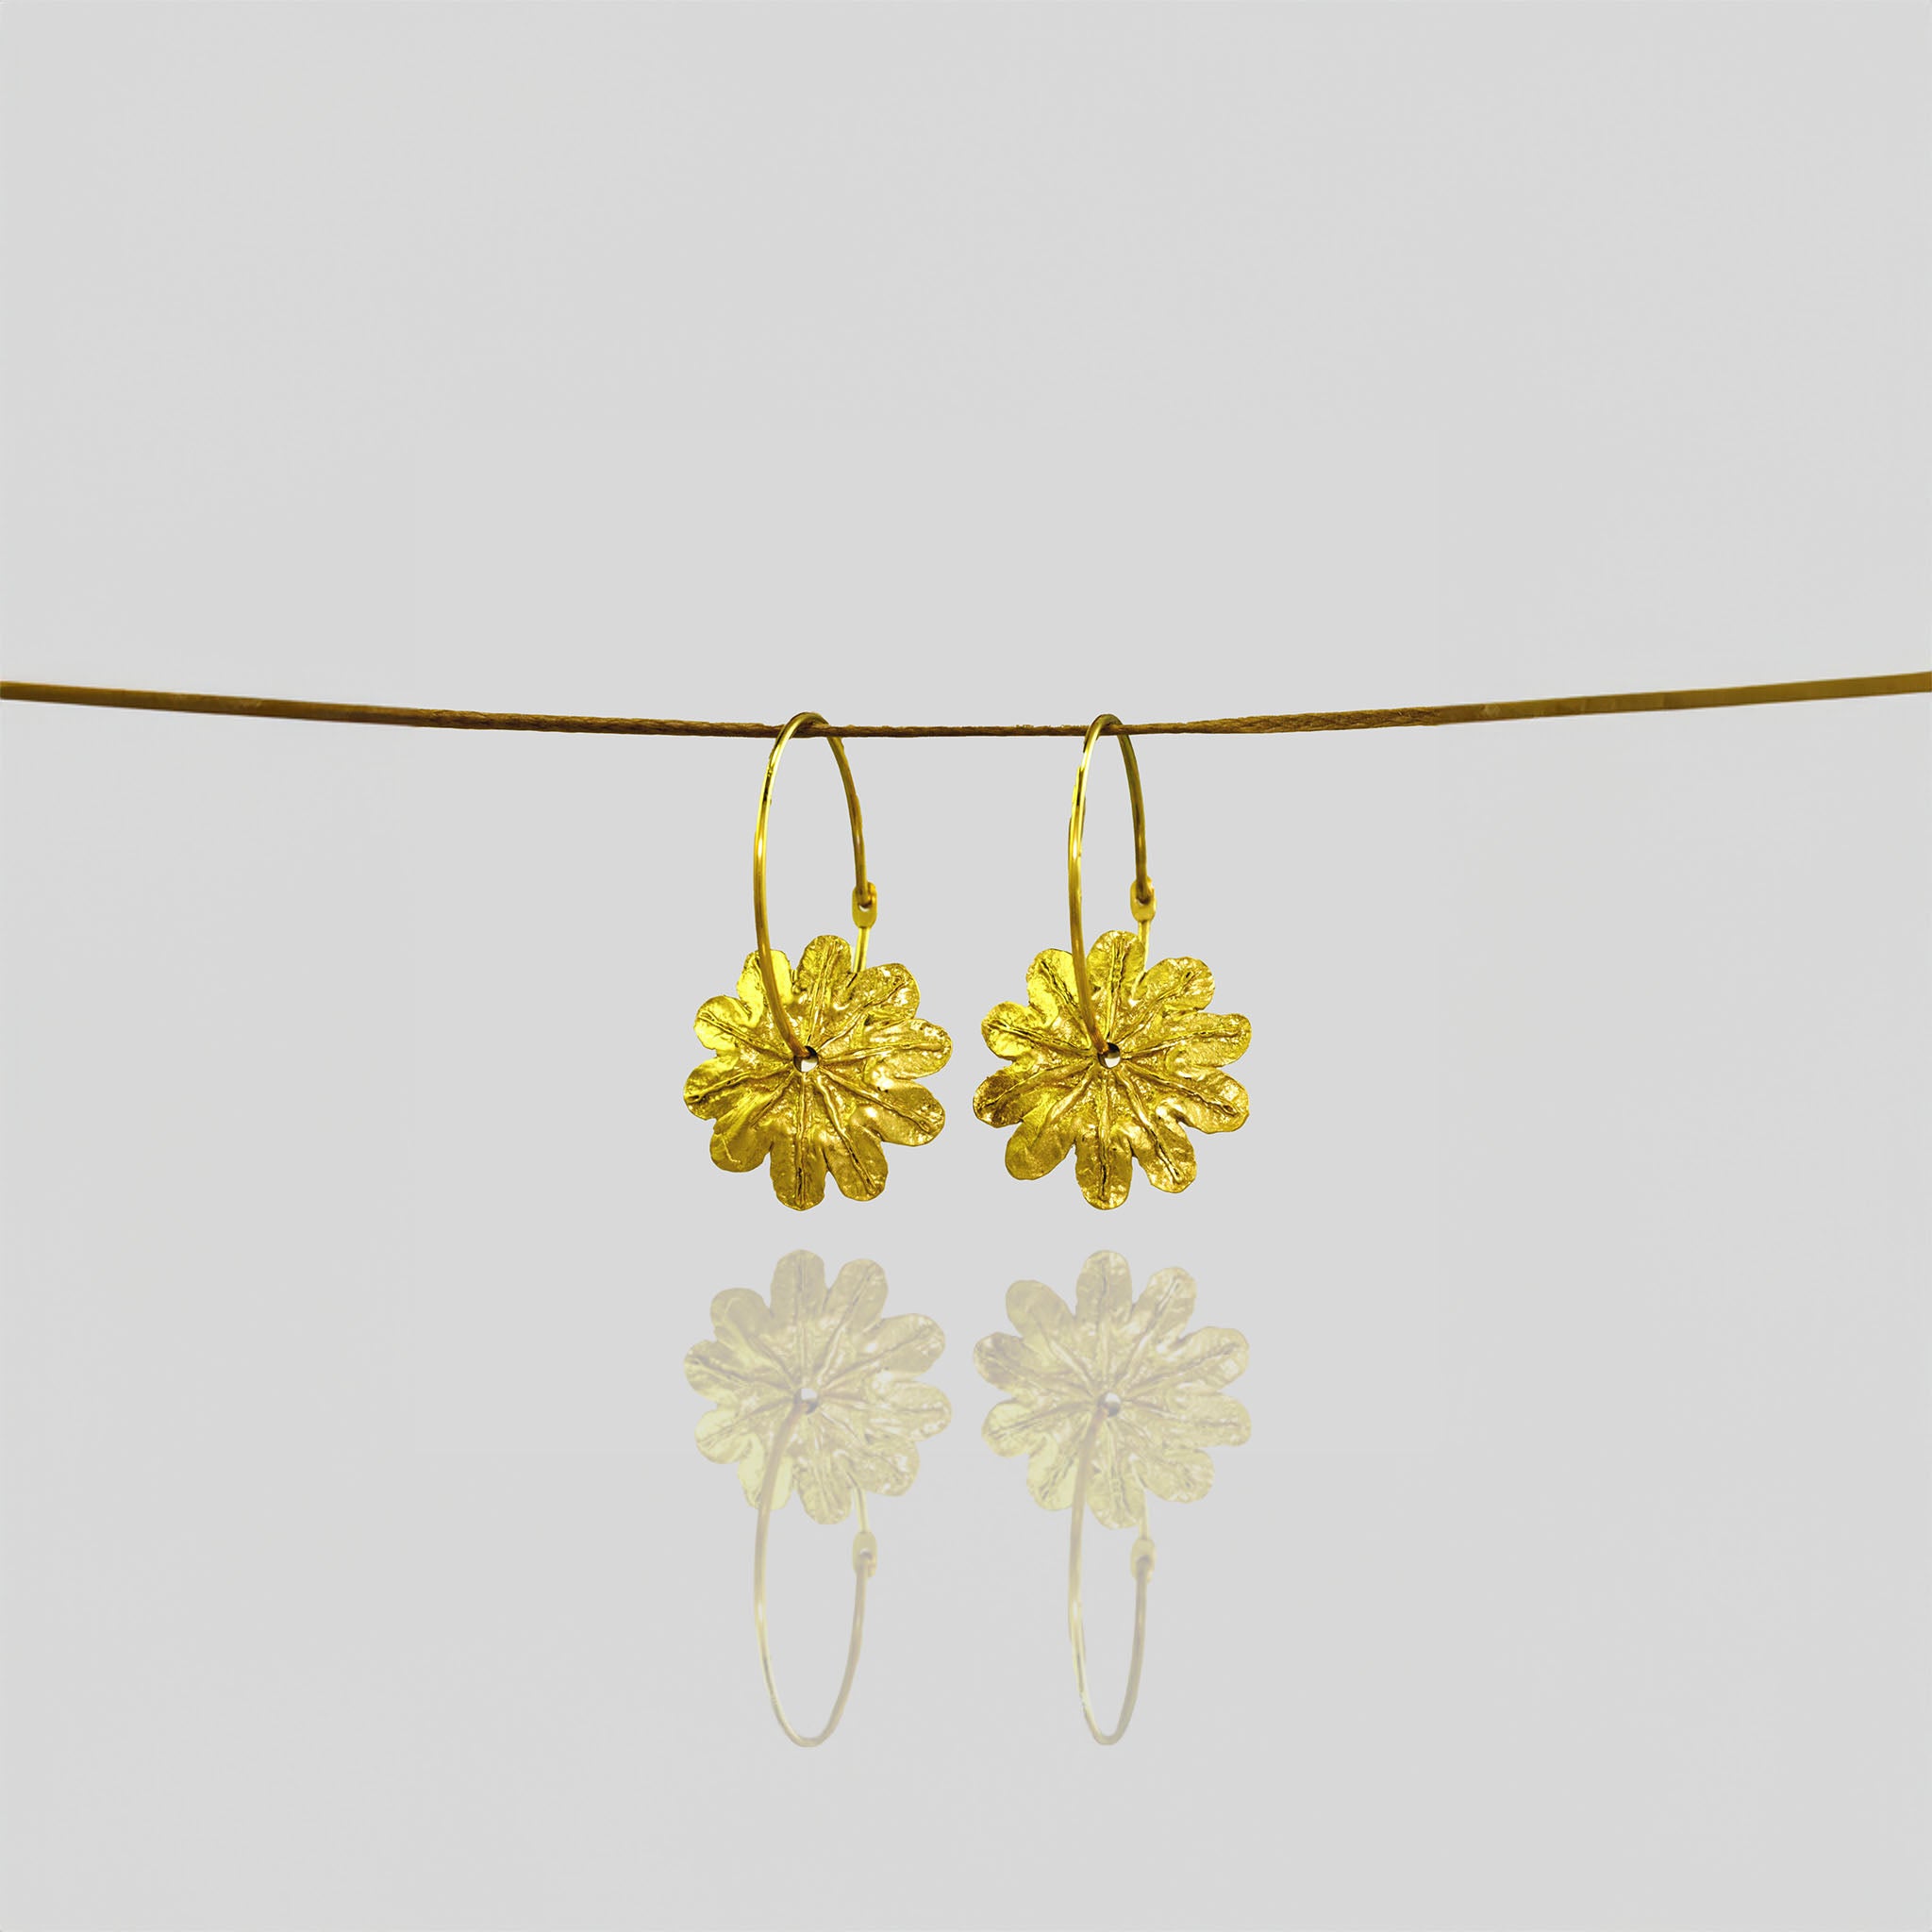 18k Gold Poppy Flower Hoop Earrings with Captivating Beauty hanging from a natural thread.